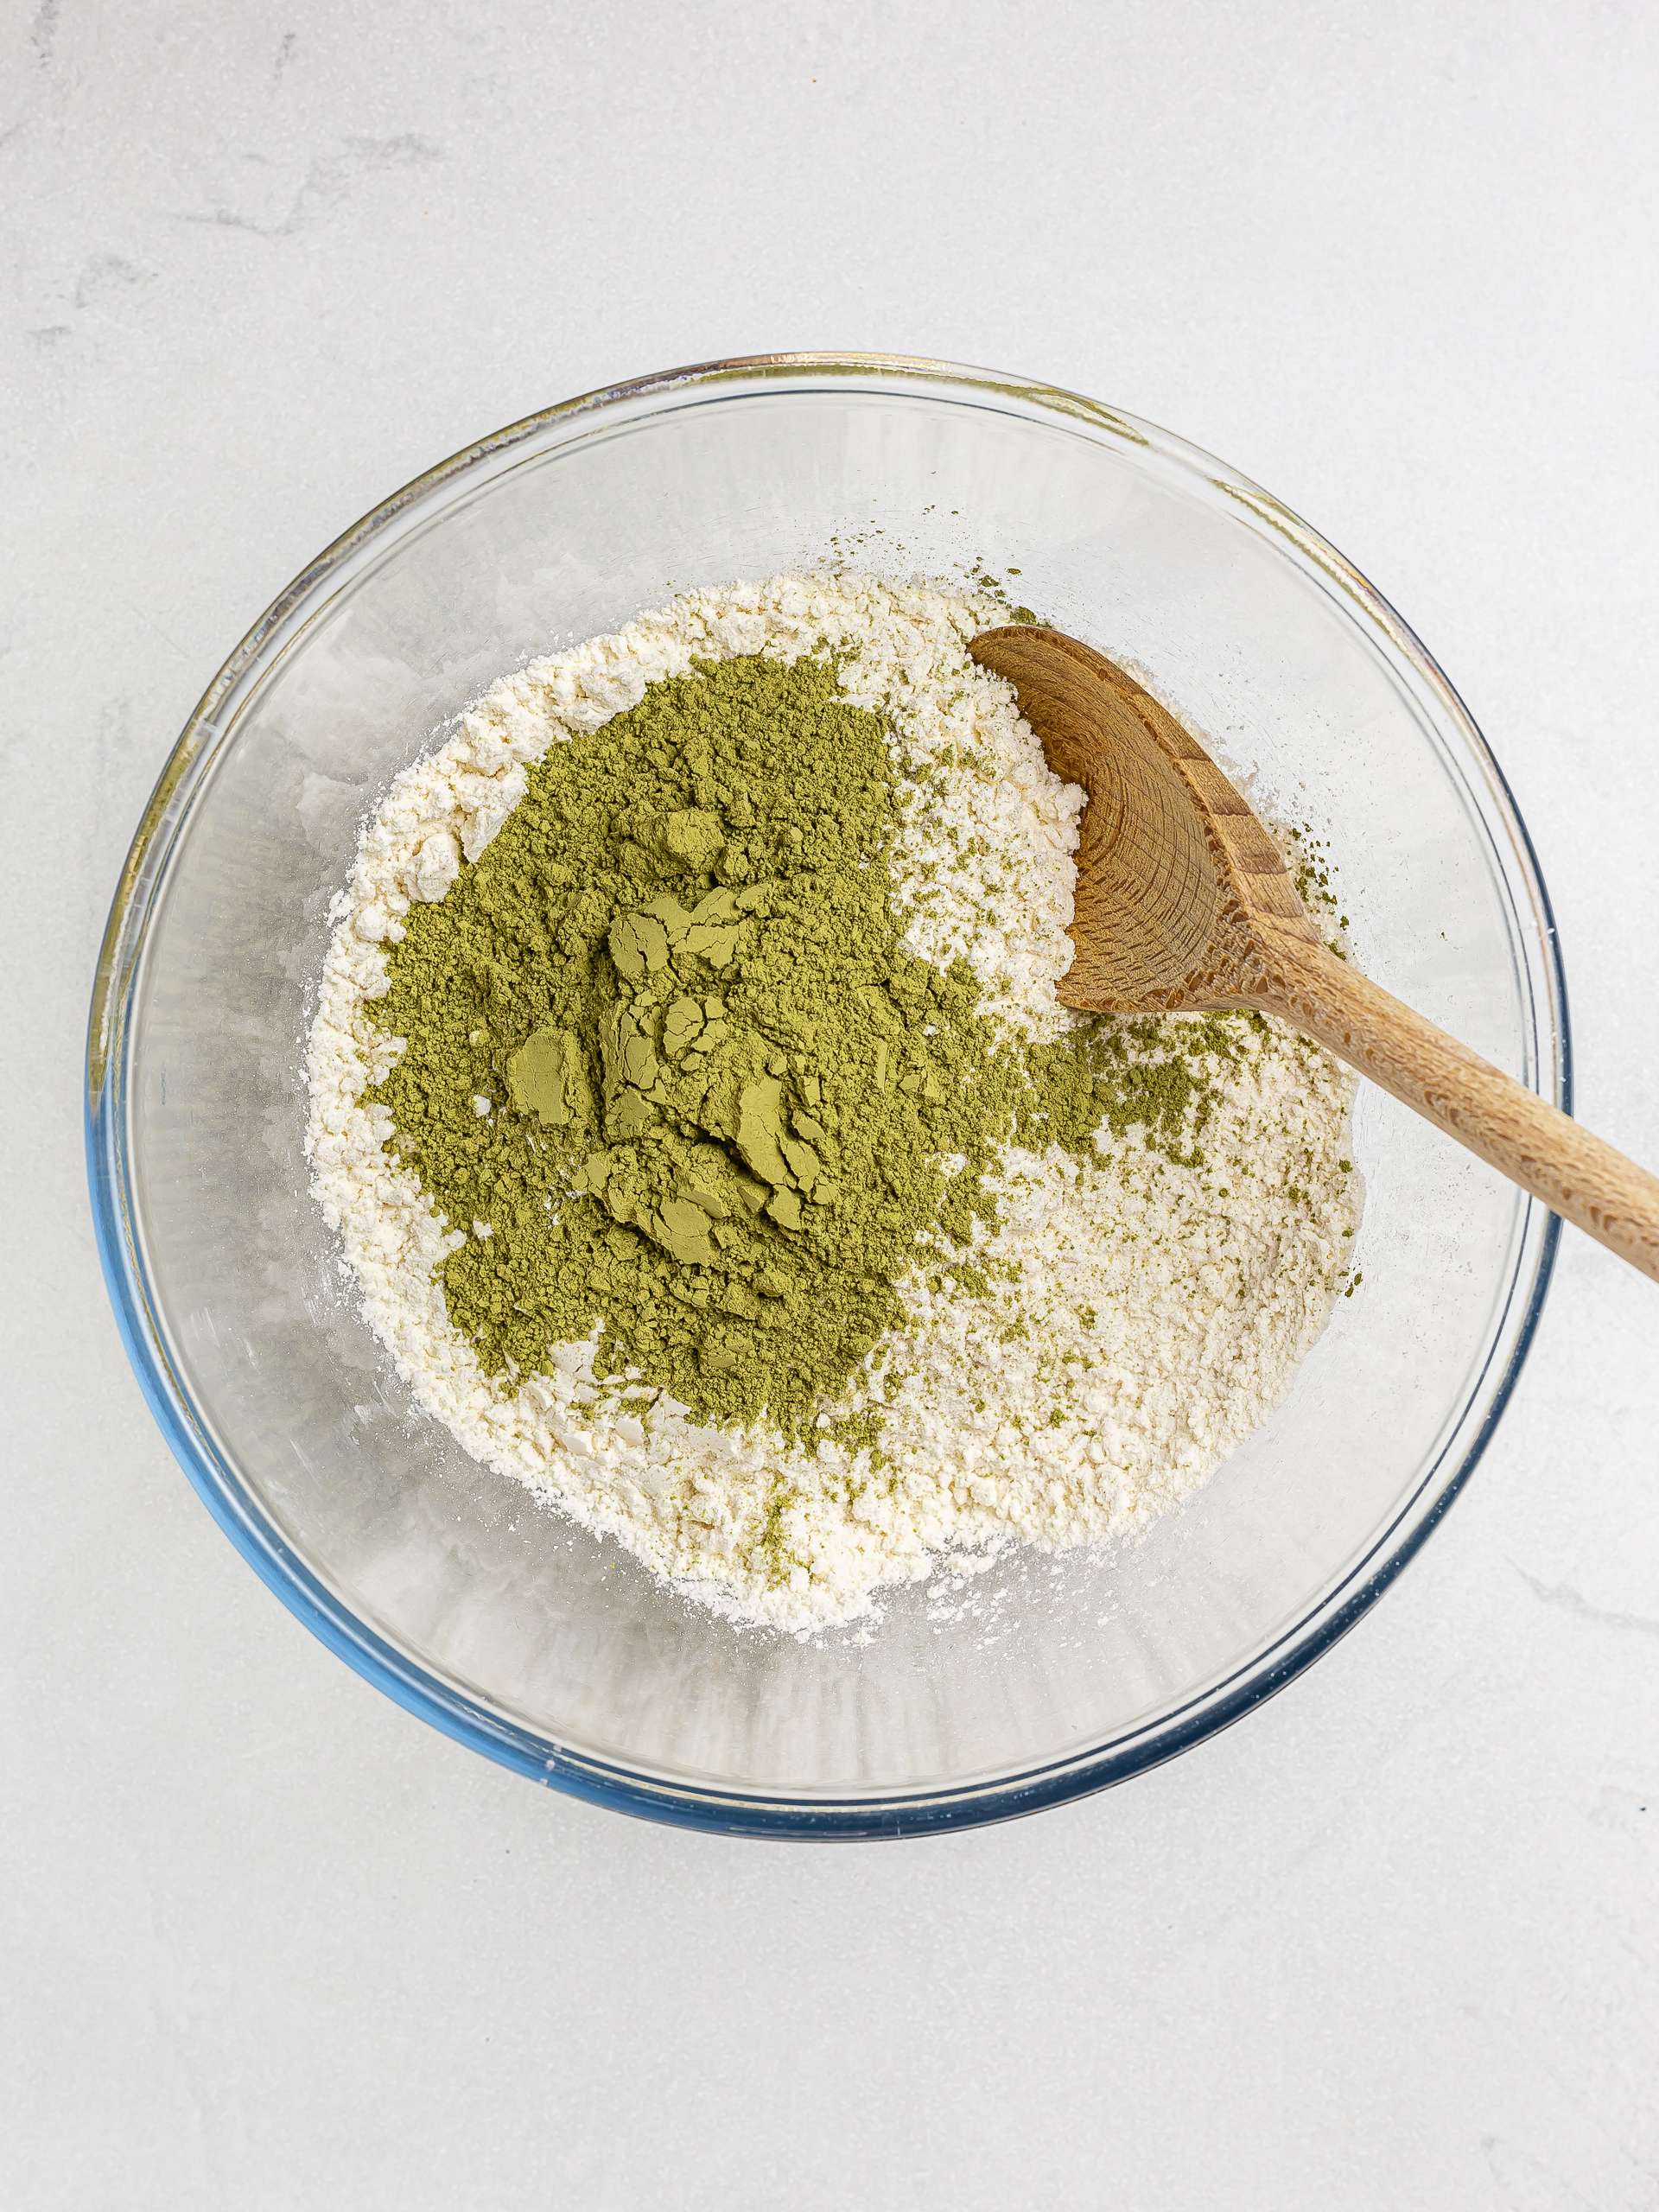 gluten-free flour with matcha powder in a bowl